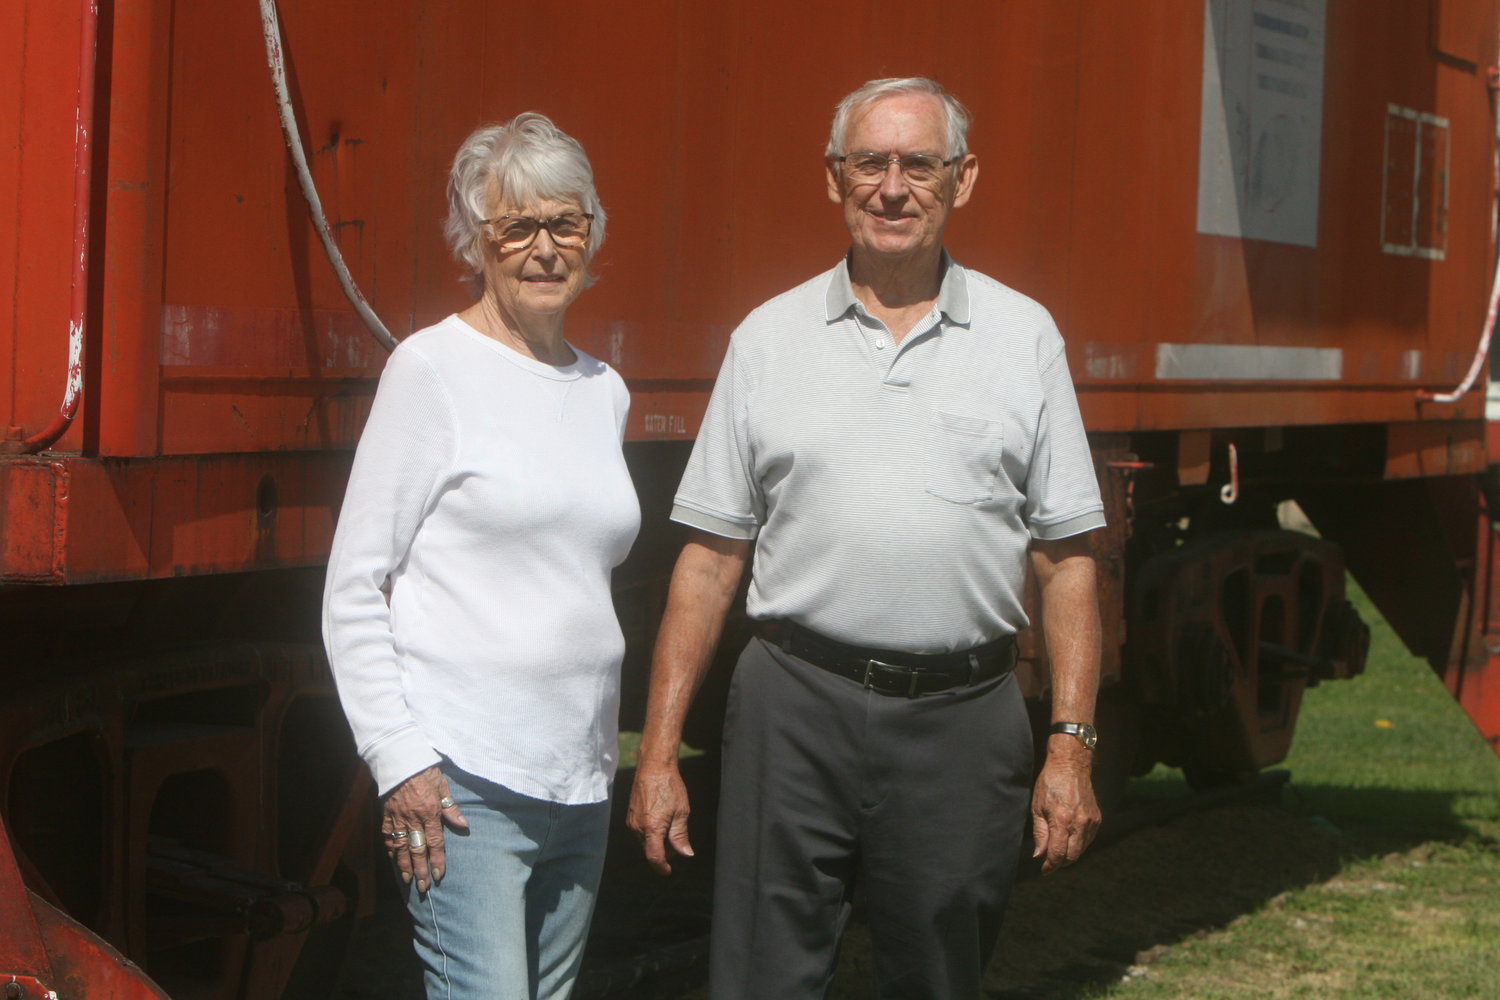 Wellsville residents Paula Adams and Curtis Peery pose near the caboose at the Burlington-Northern Railroad train depot in Wellsville on Sept. 11. Adams and Peery have made plans on improving the depot, which is located on the corner of Hudson and Clay streets.